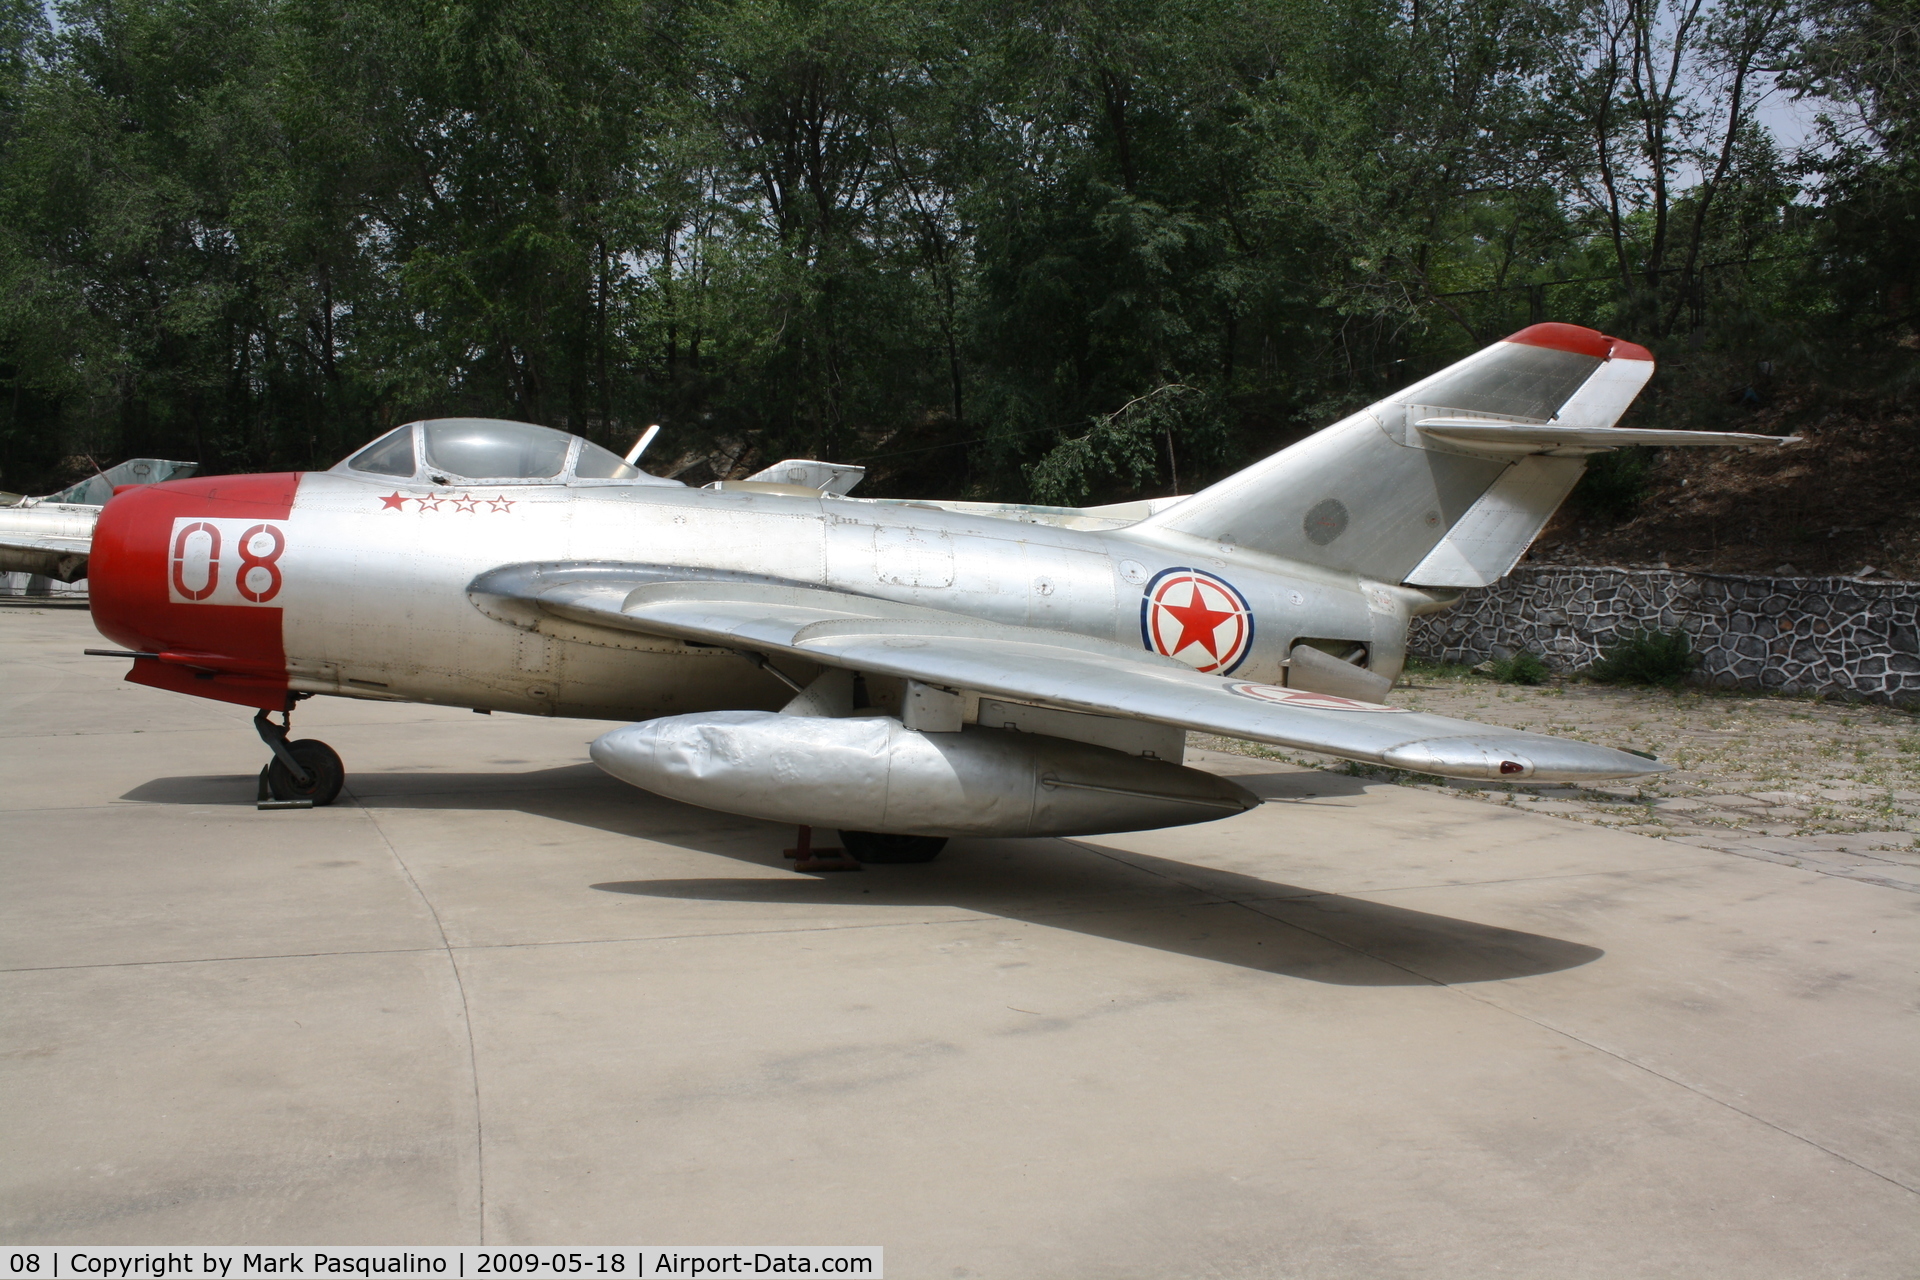 08, Mikoyan-Gurevich MiG-15 C/N Not found 08, MiG-15  Located at Datangshan, China